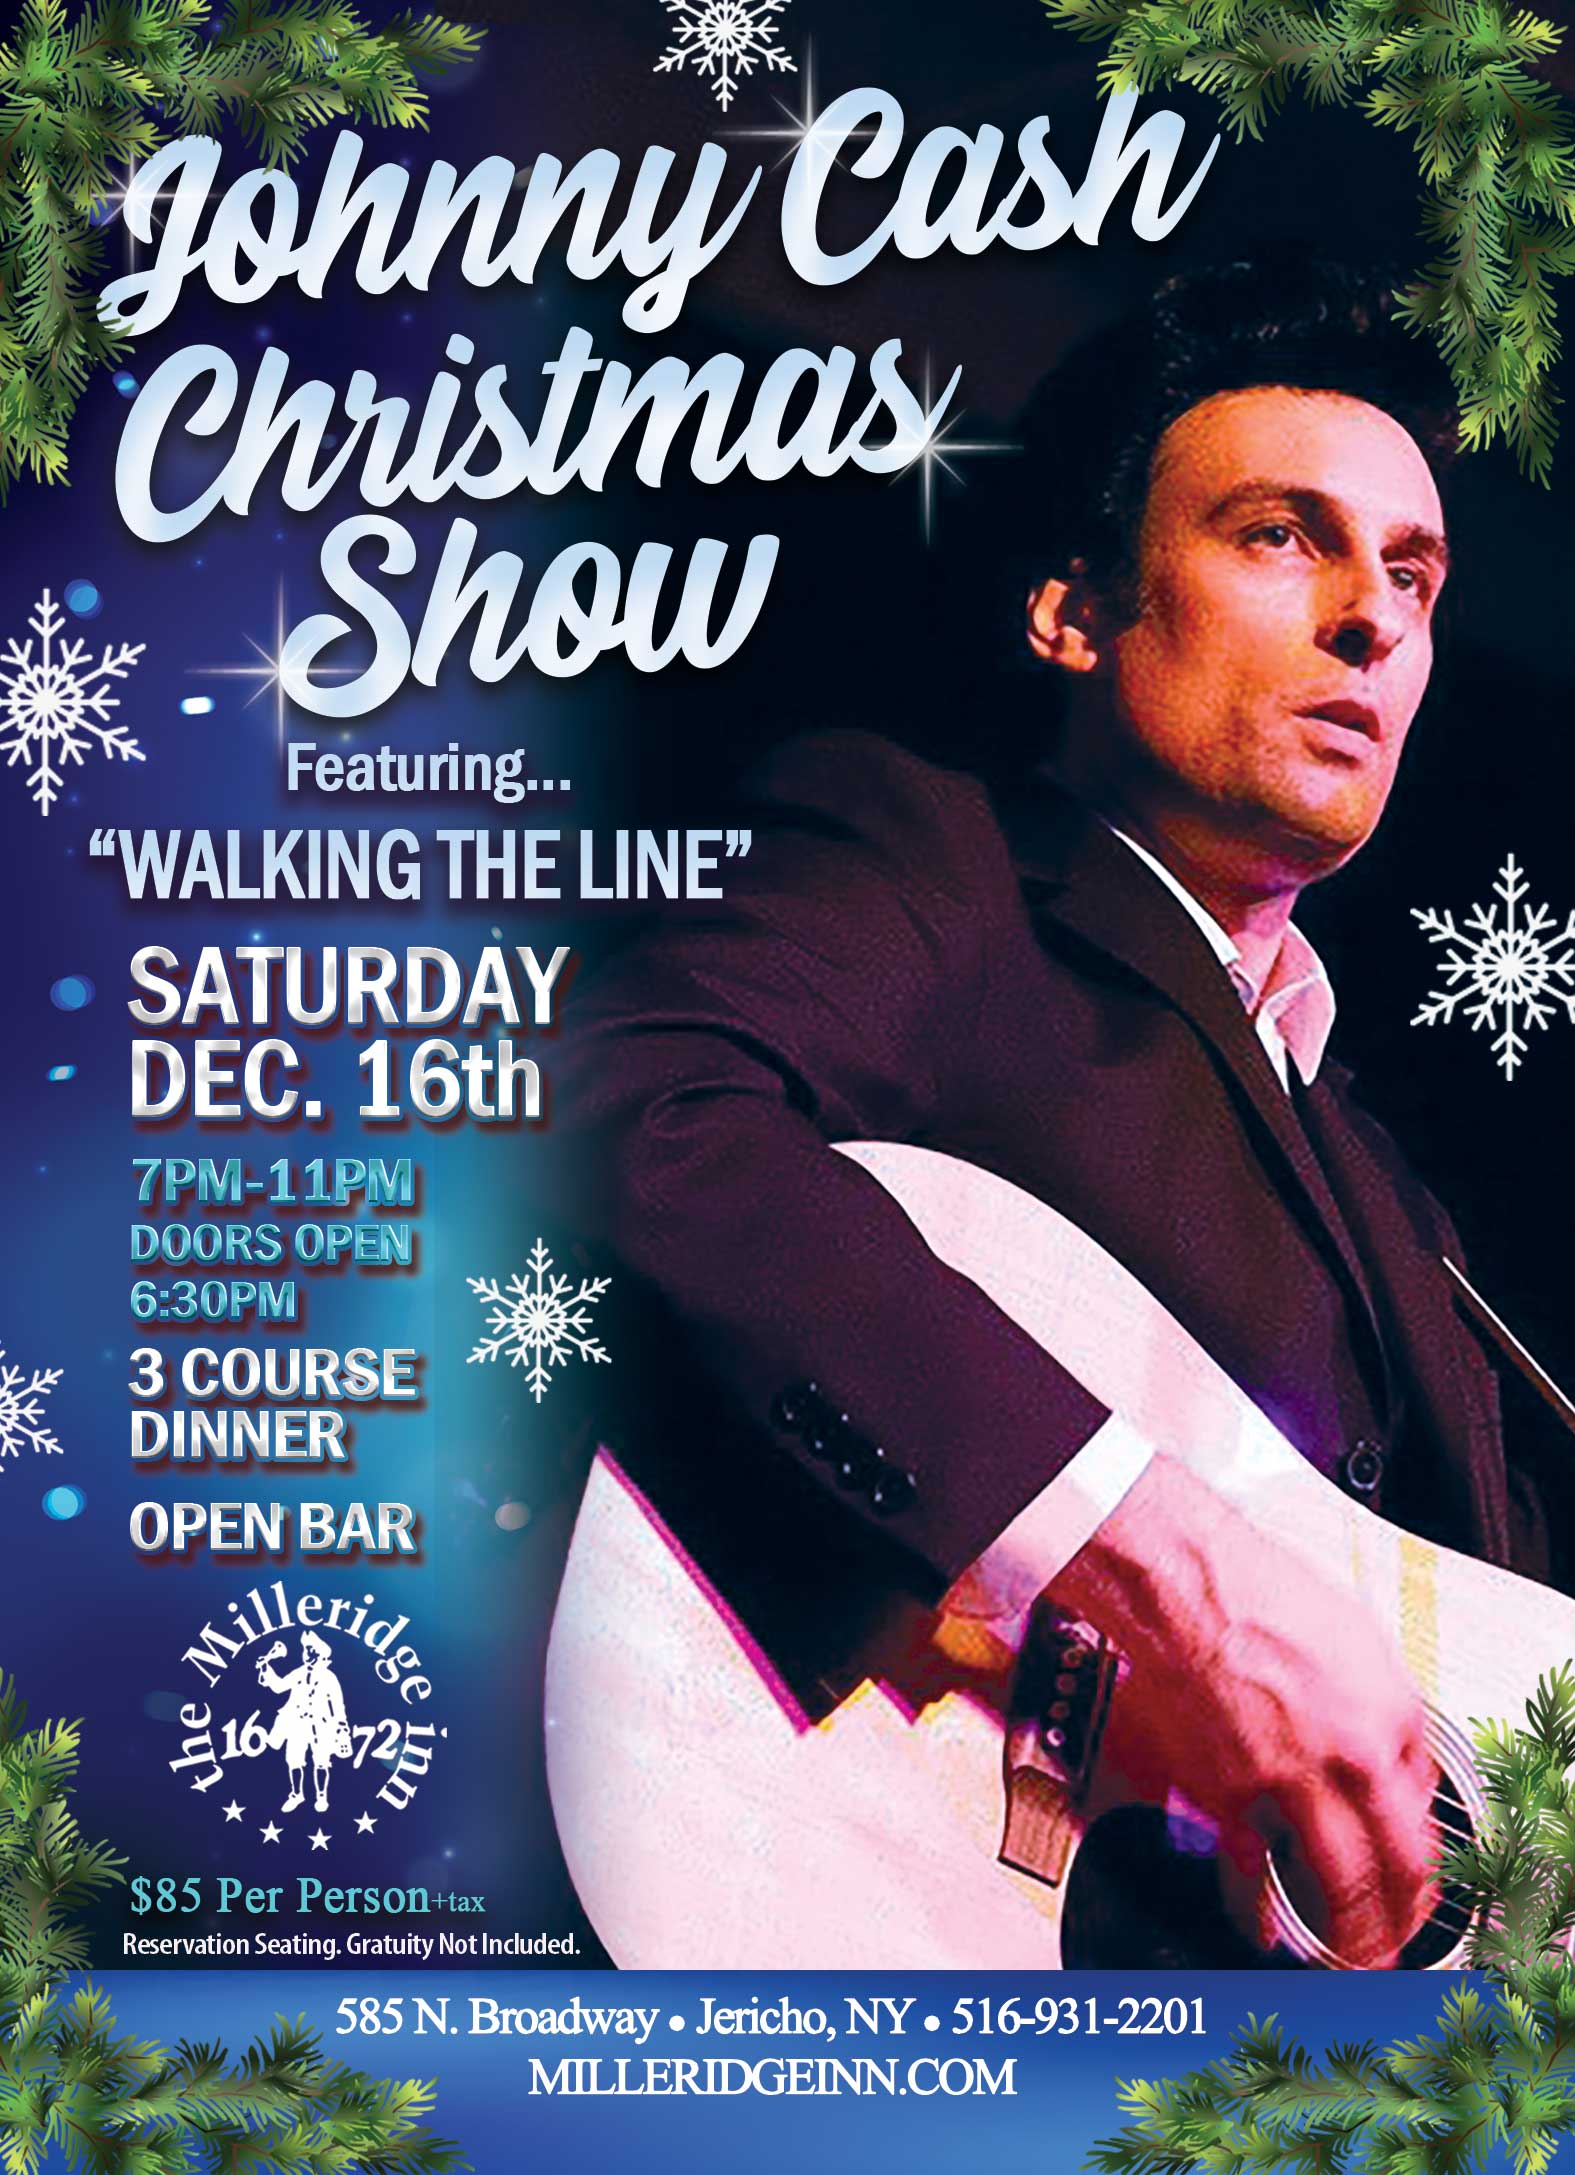 Johnny Cash Christmas Show at the Milleridge